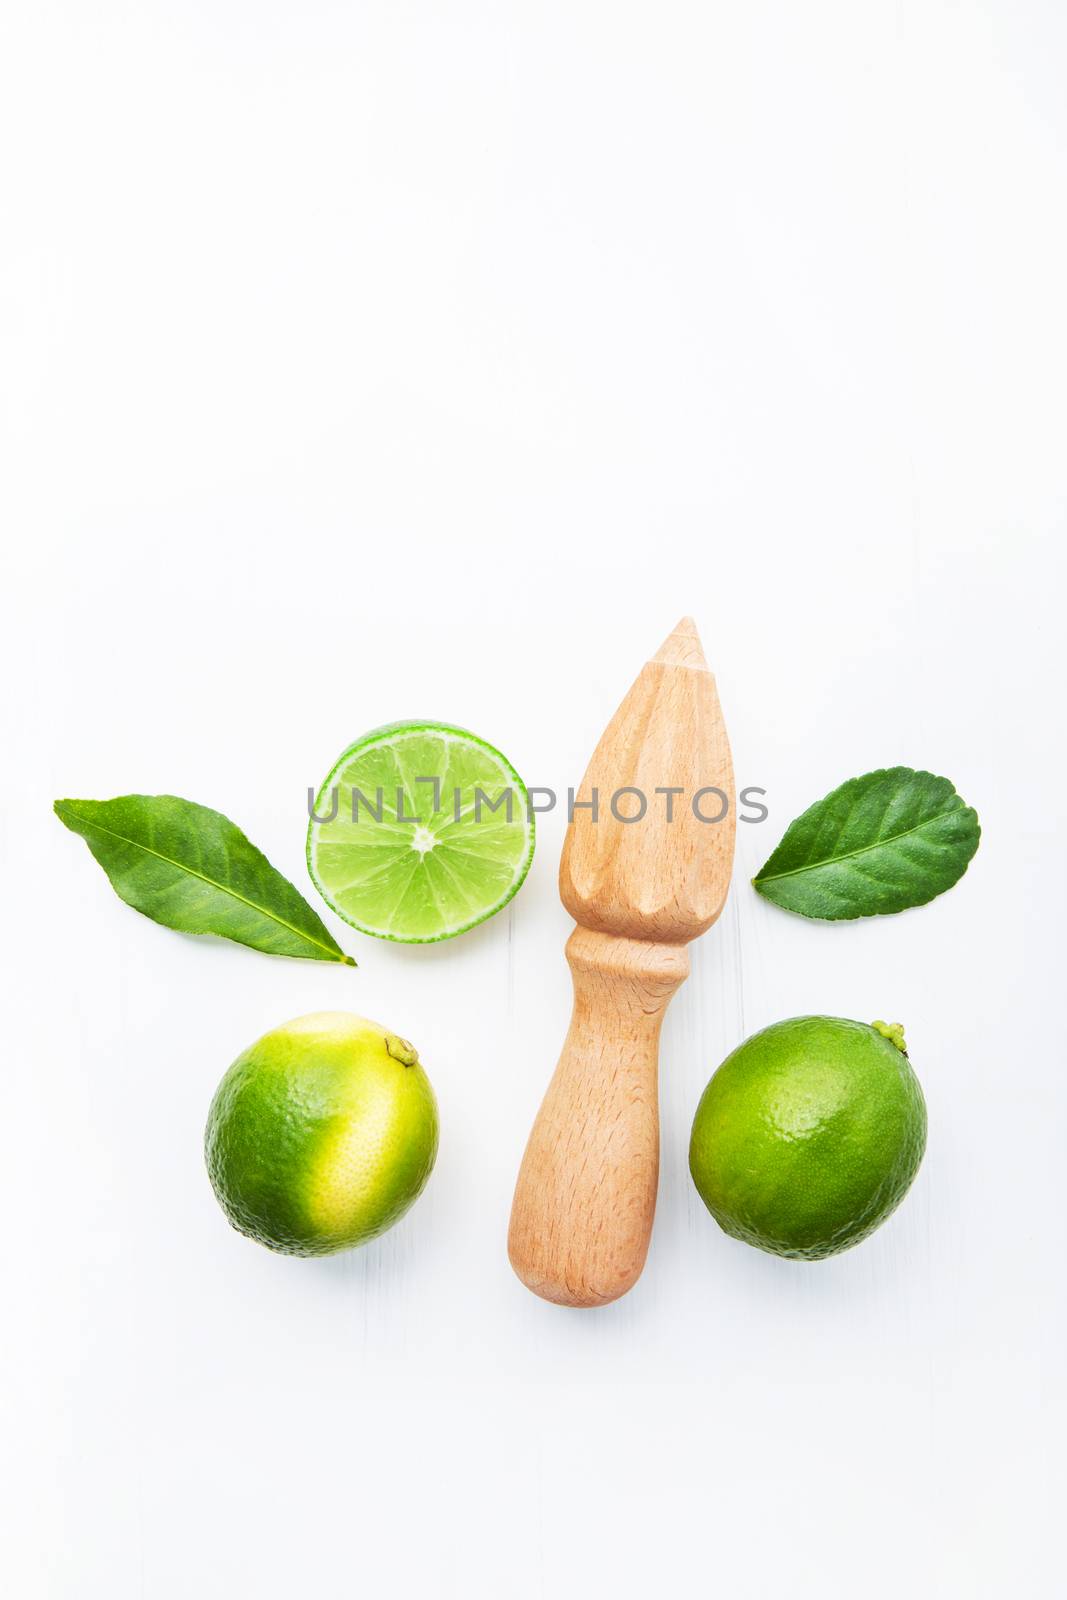 Fresh limes and wooden juicer on white background. Top view with by Bowonpat